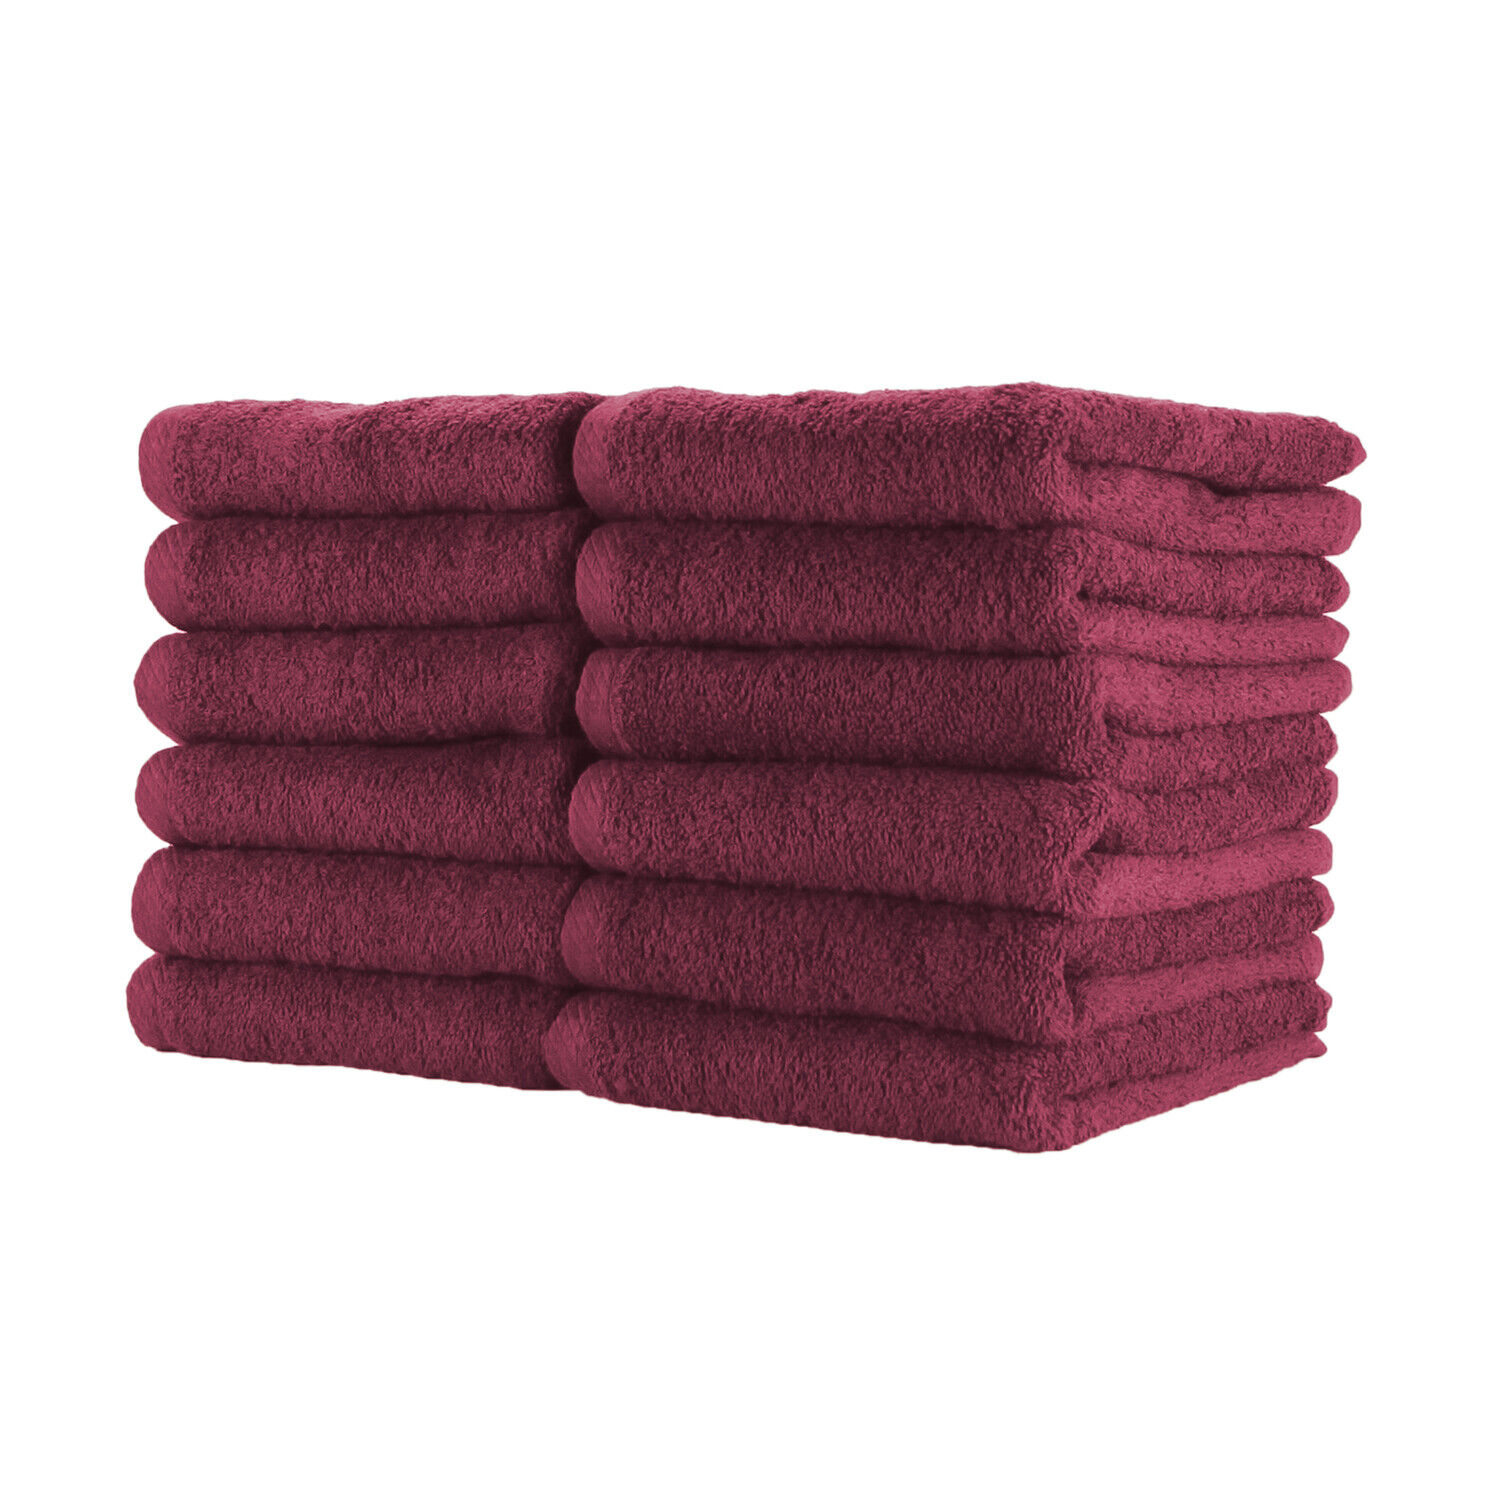 Salon Towels - Packs of 12 - Bleach Safe 16 x 27 Cotton Towel - Color Options  Arkwright Does Not Apply - фотография #2